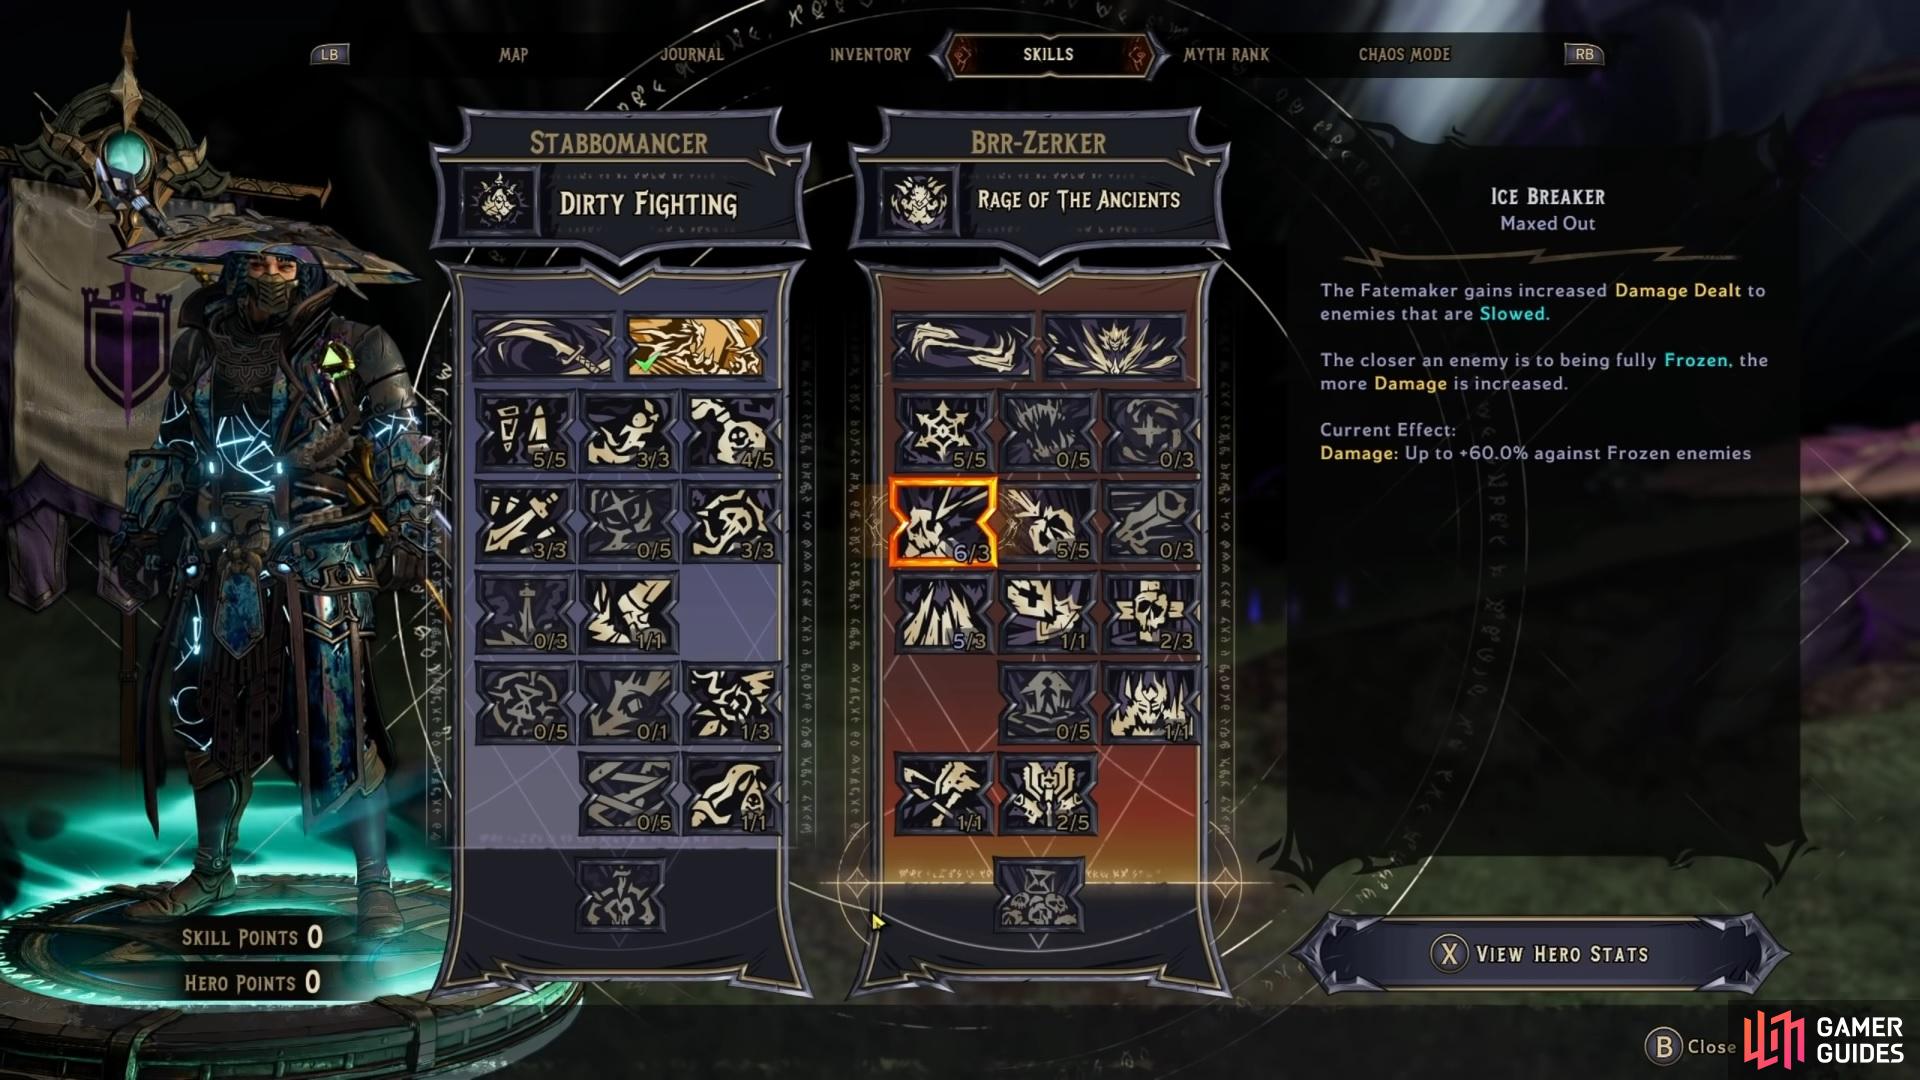 The skill trees for this build